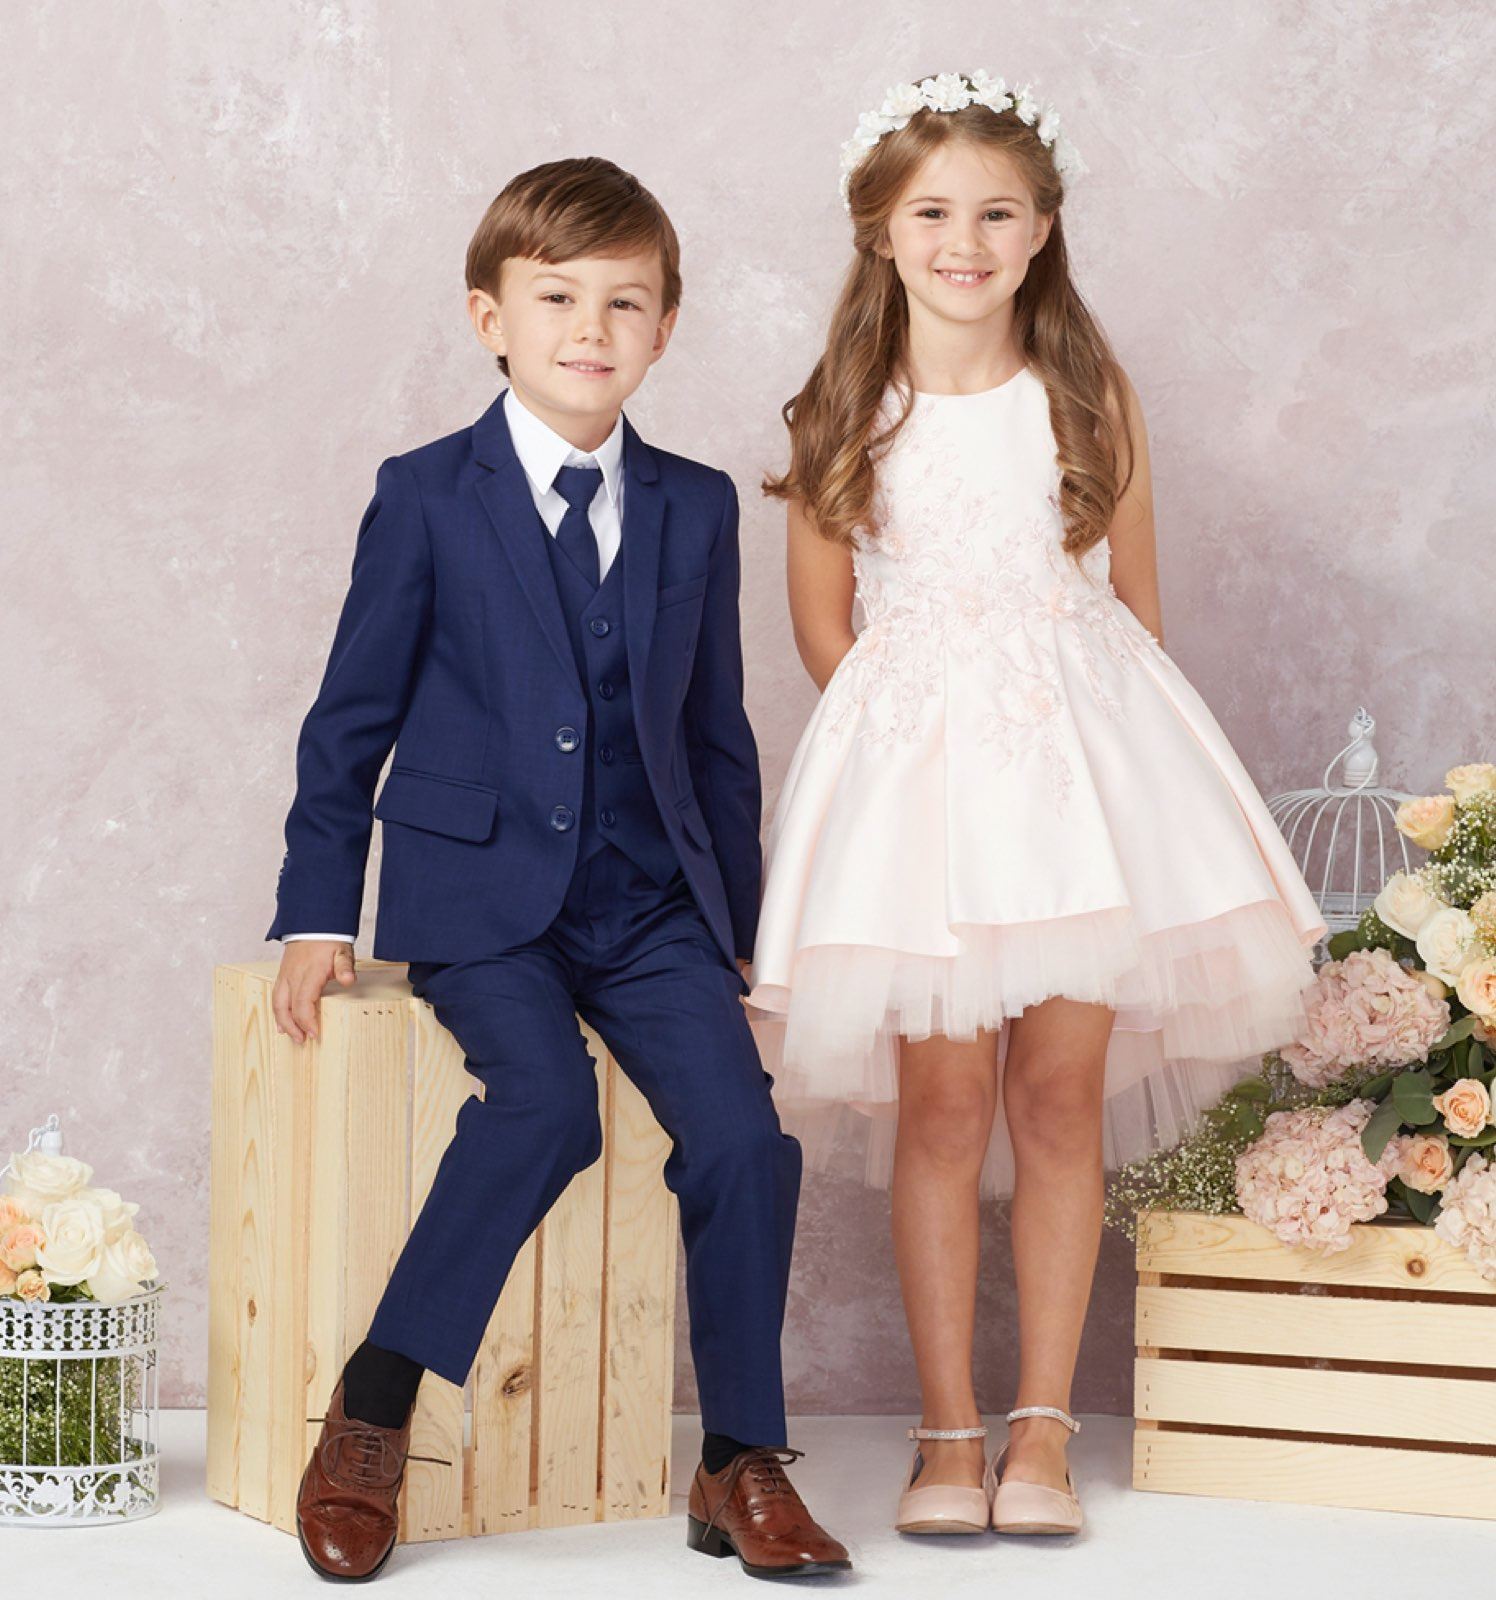 Kids & formal wear at It's Your Day Bridal located in LaSalle, Ontario